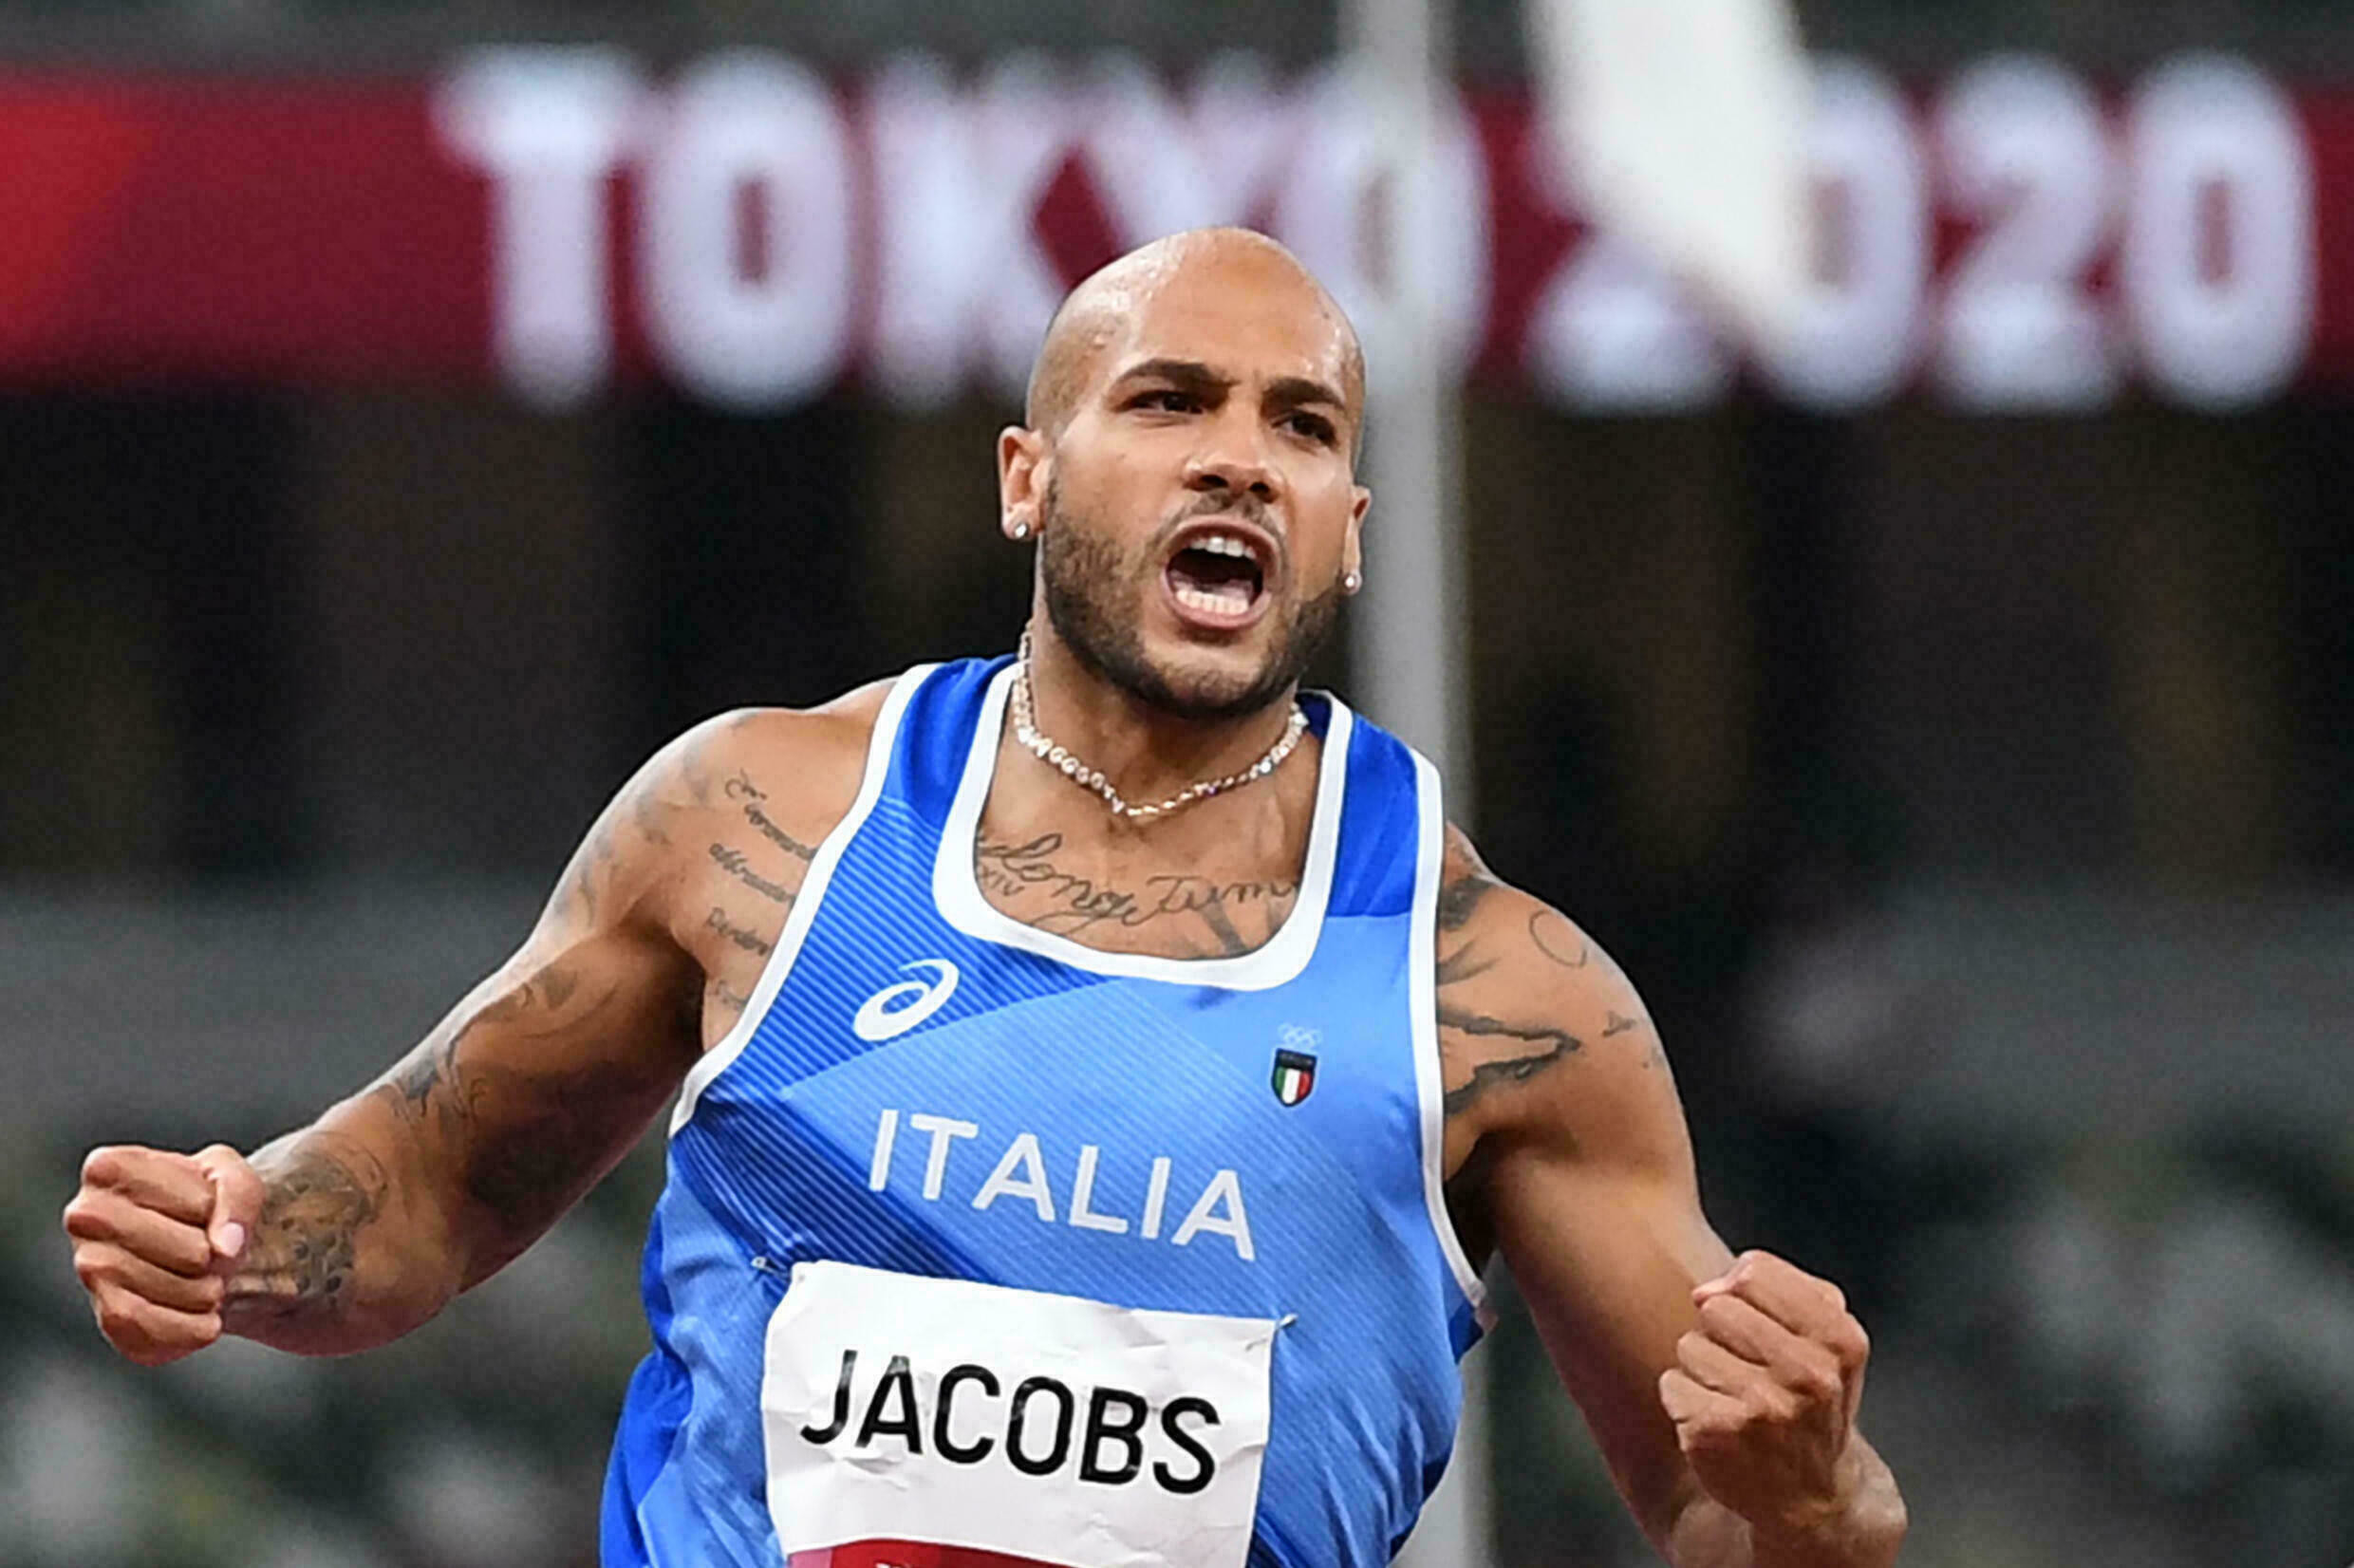 Tokyo Olympics 100m champion  Lamont Marcell Jacobs won't run again until 2022